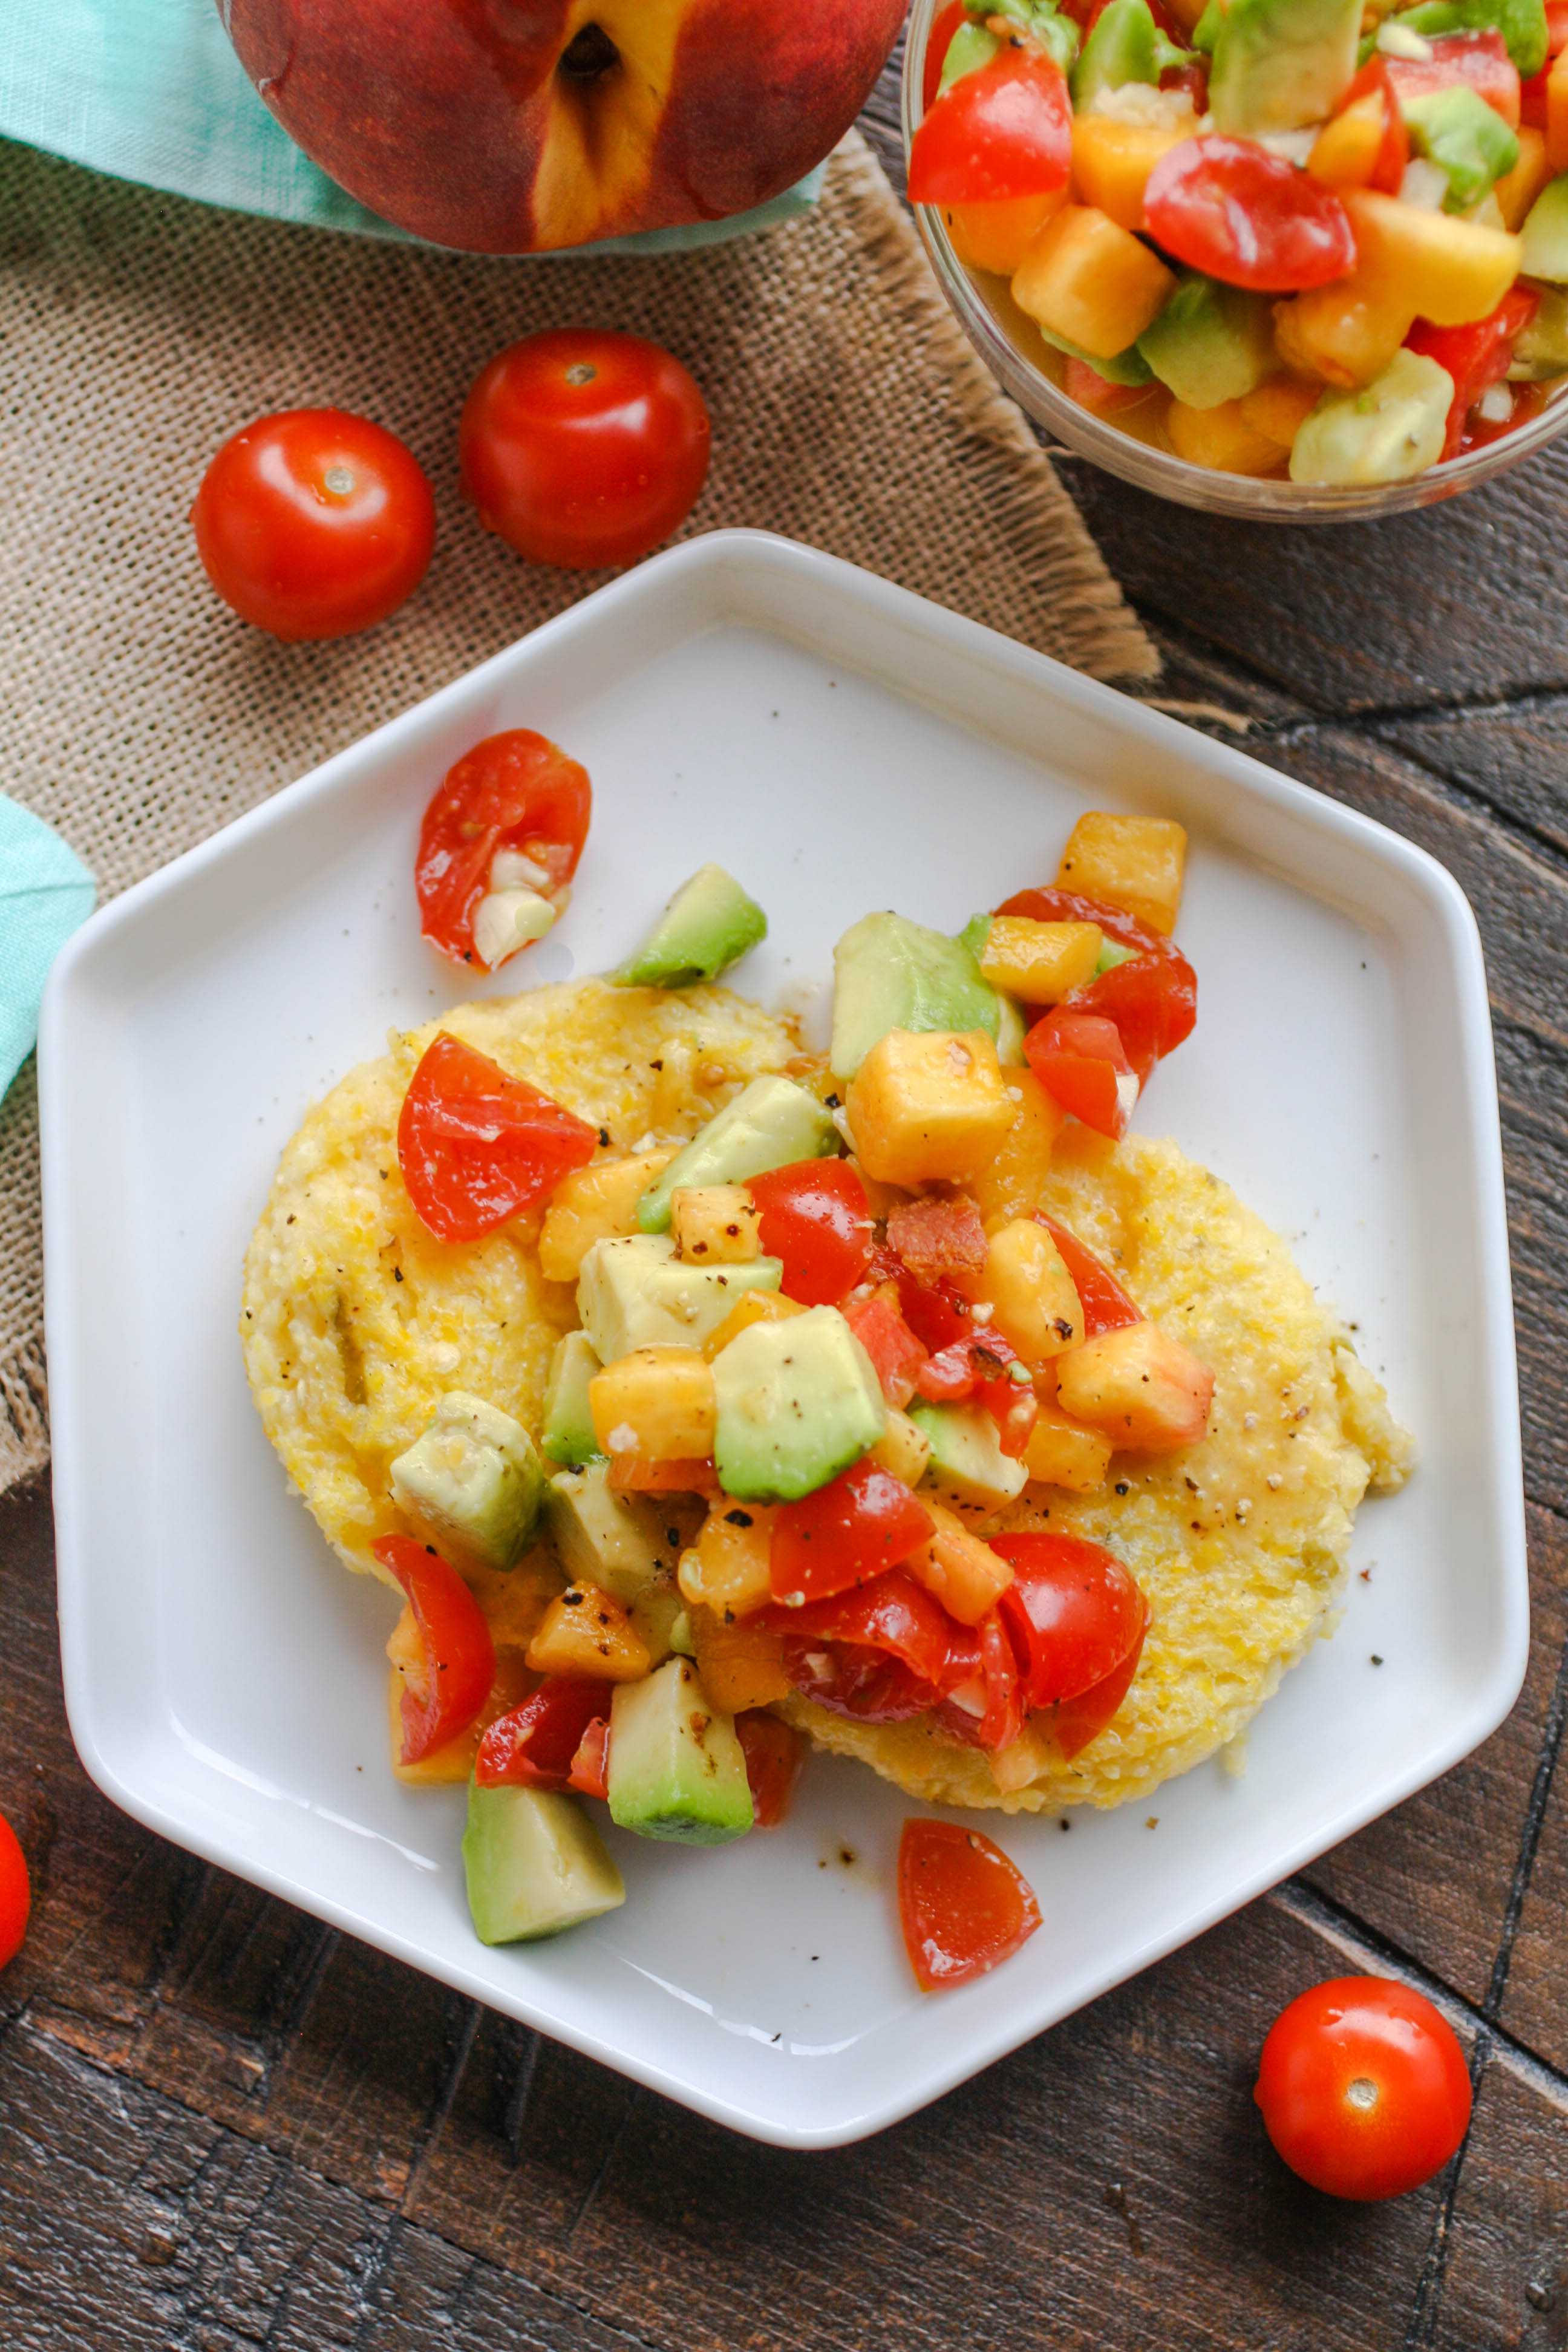 Hatch Chile Grits Cakes with Peach-Citrus Salsa is a fun and festive appetizer for any get together! Hatch Chile Grits Cakes with Peach-Citrus Salsa is what you need to serve as a tasty starter!